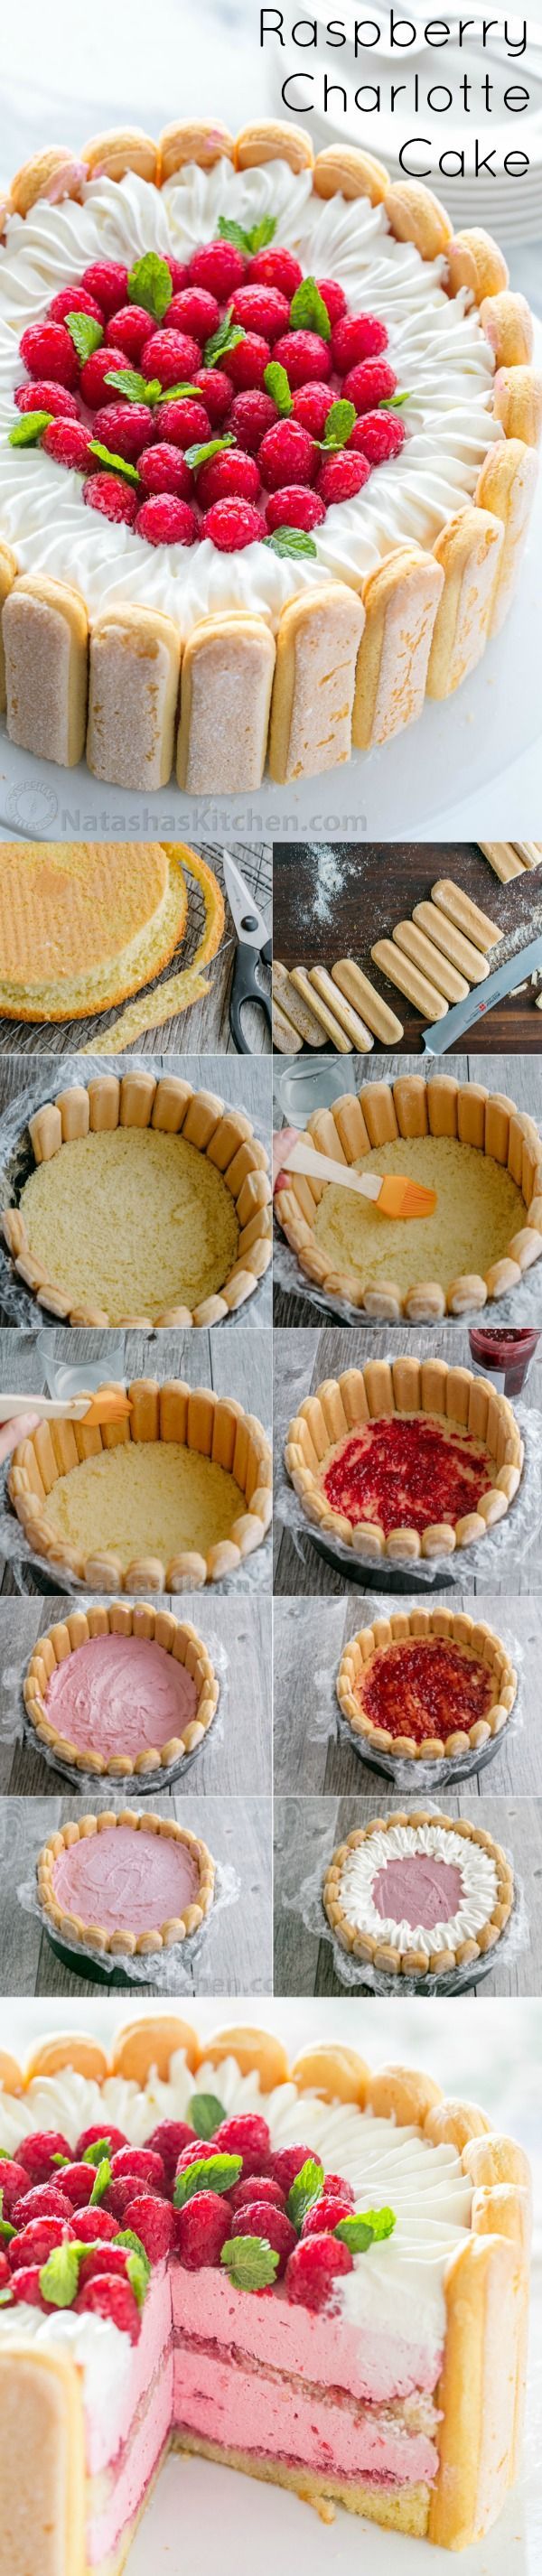 With step-by-step photos, you can master Raspberry Charlotte Russe Cake! A Charlot